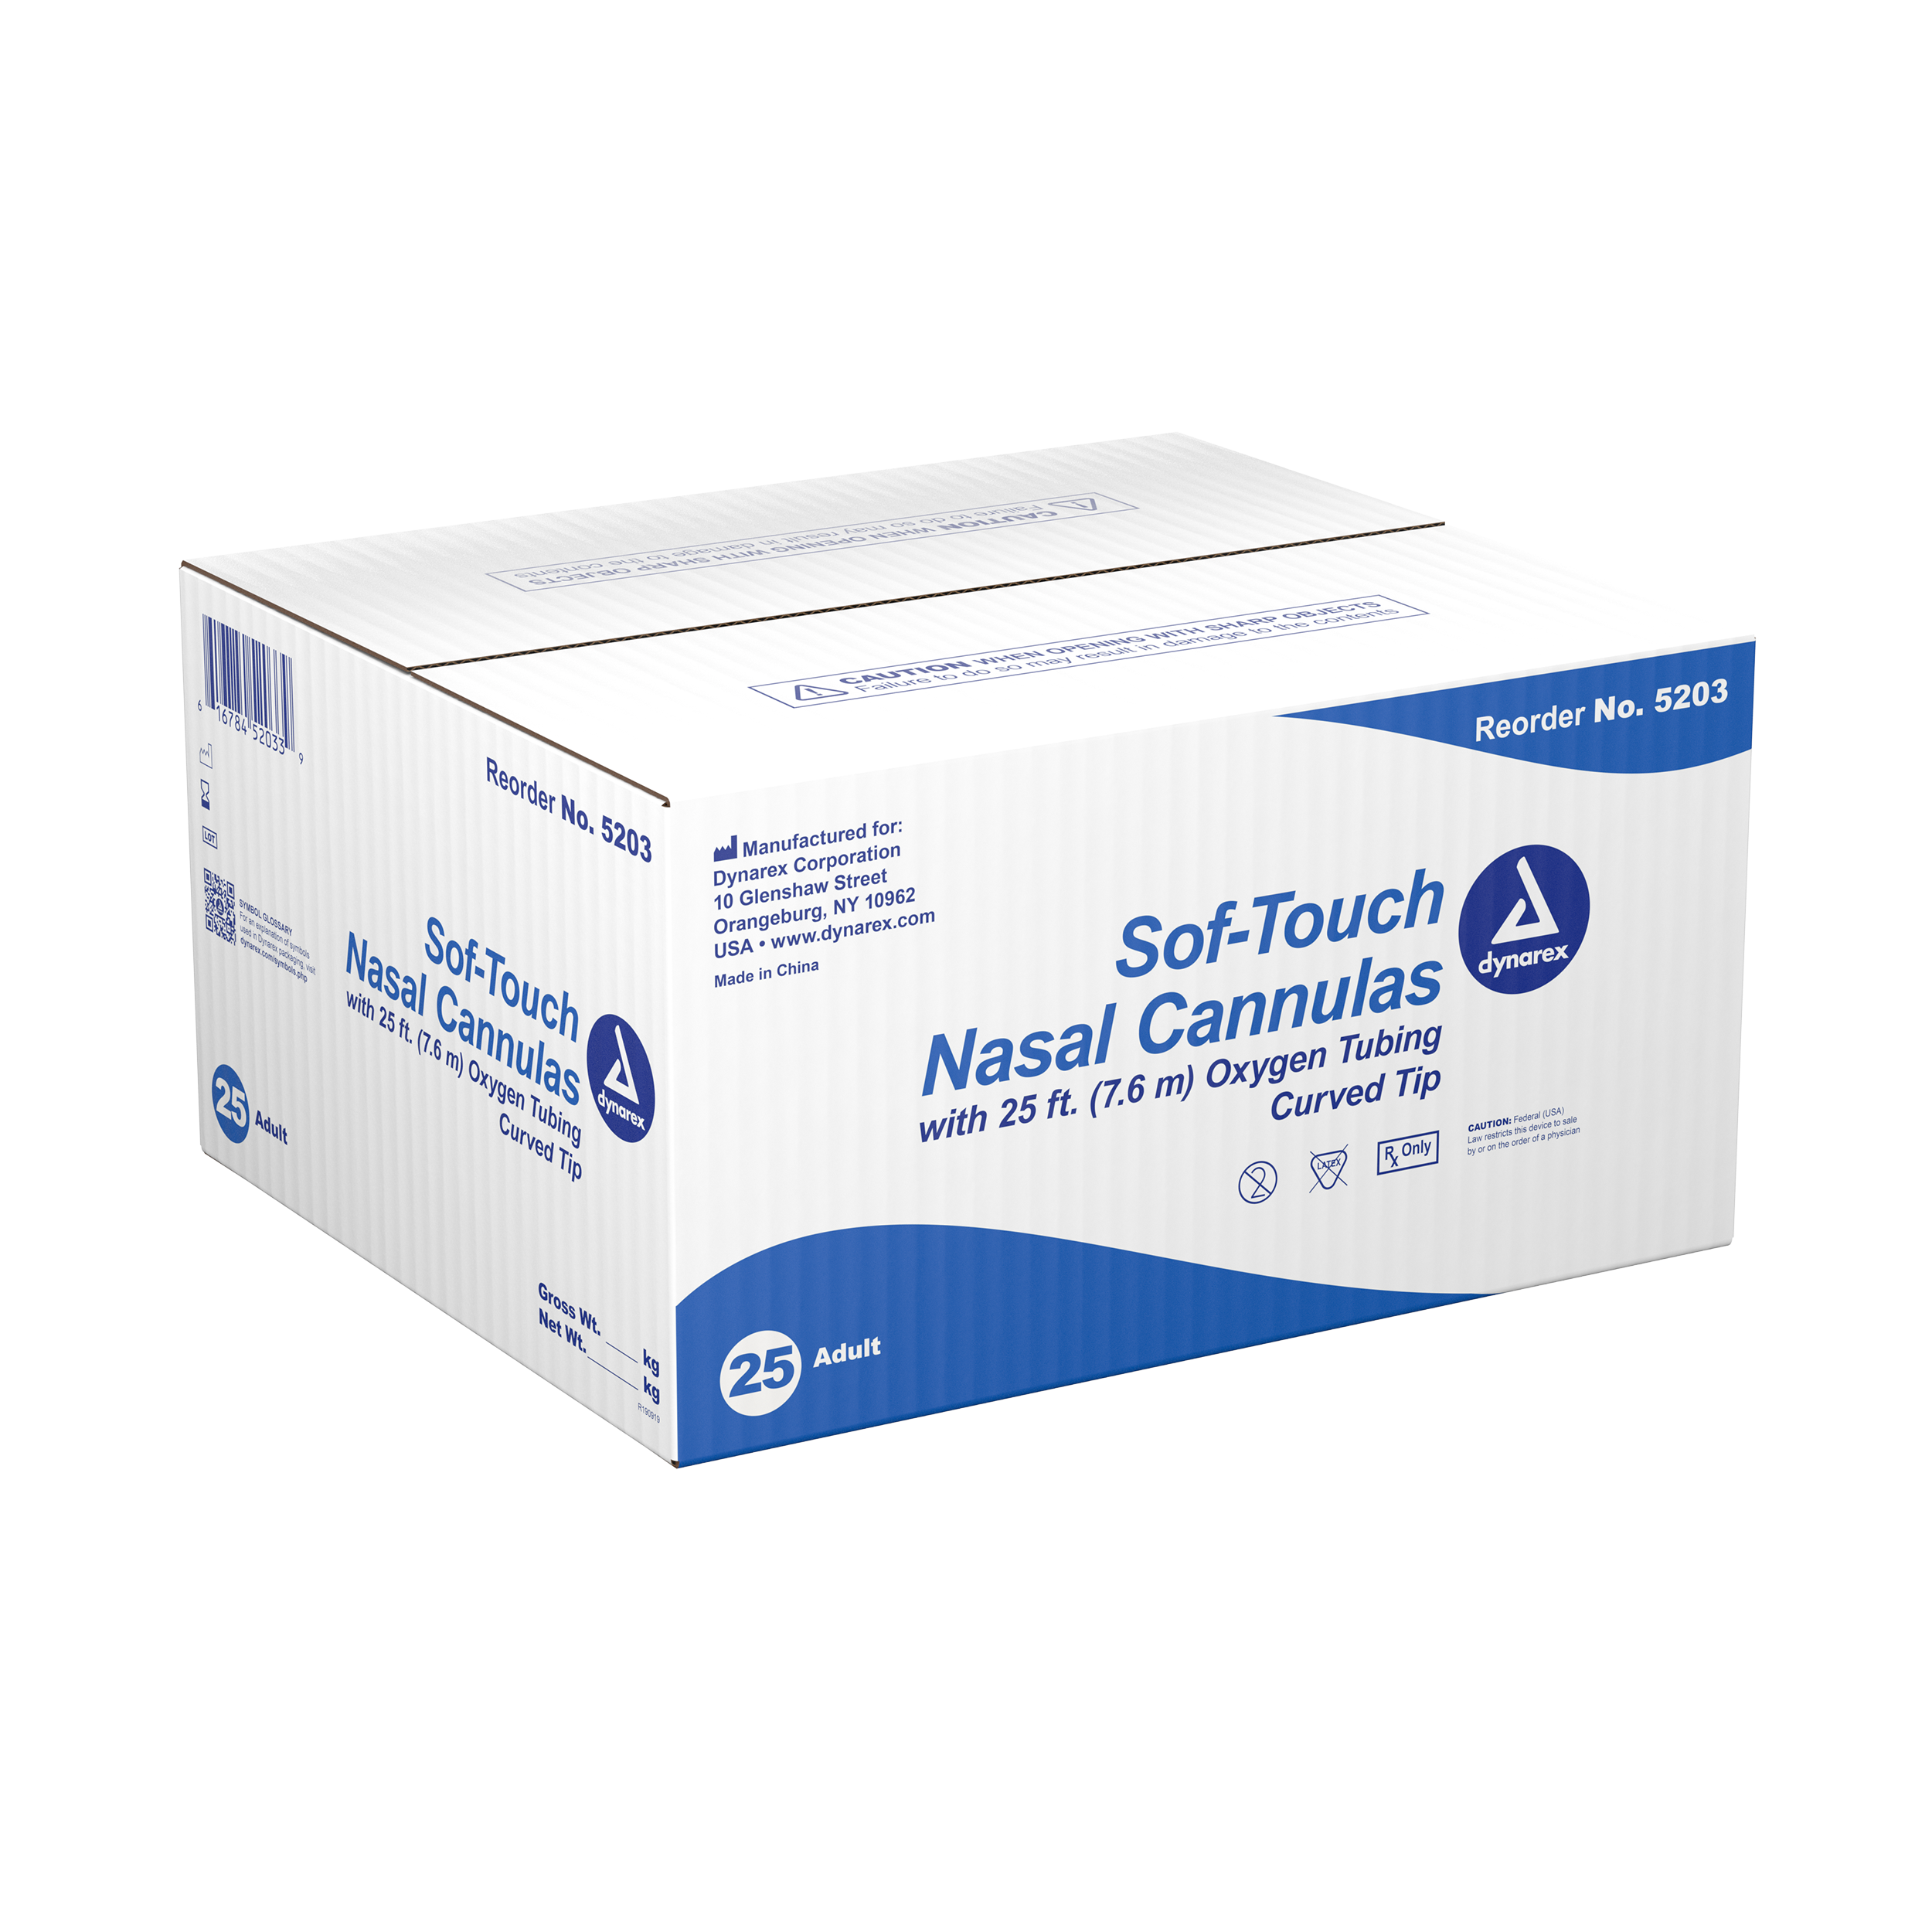 Sof-touch Nasal Cannulas - Adult - 25ft Adult - 25/Cs